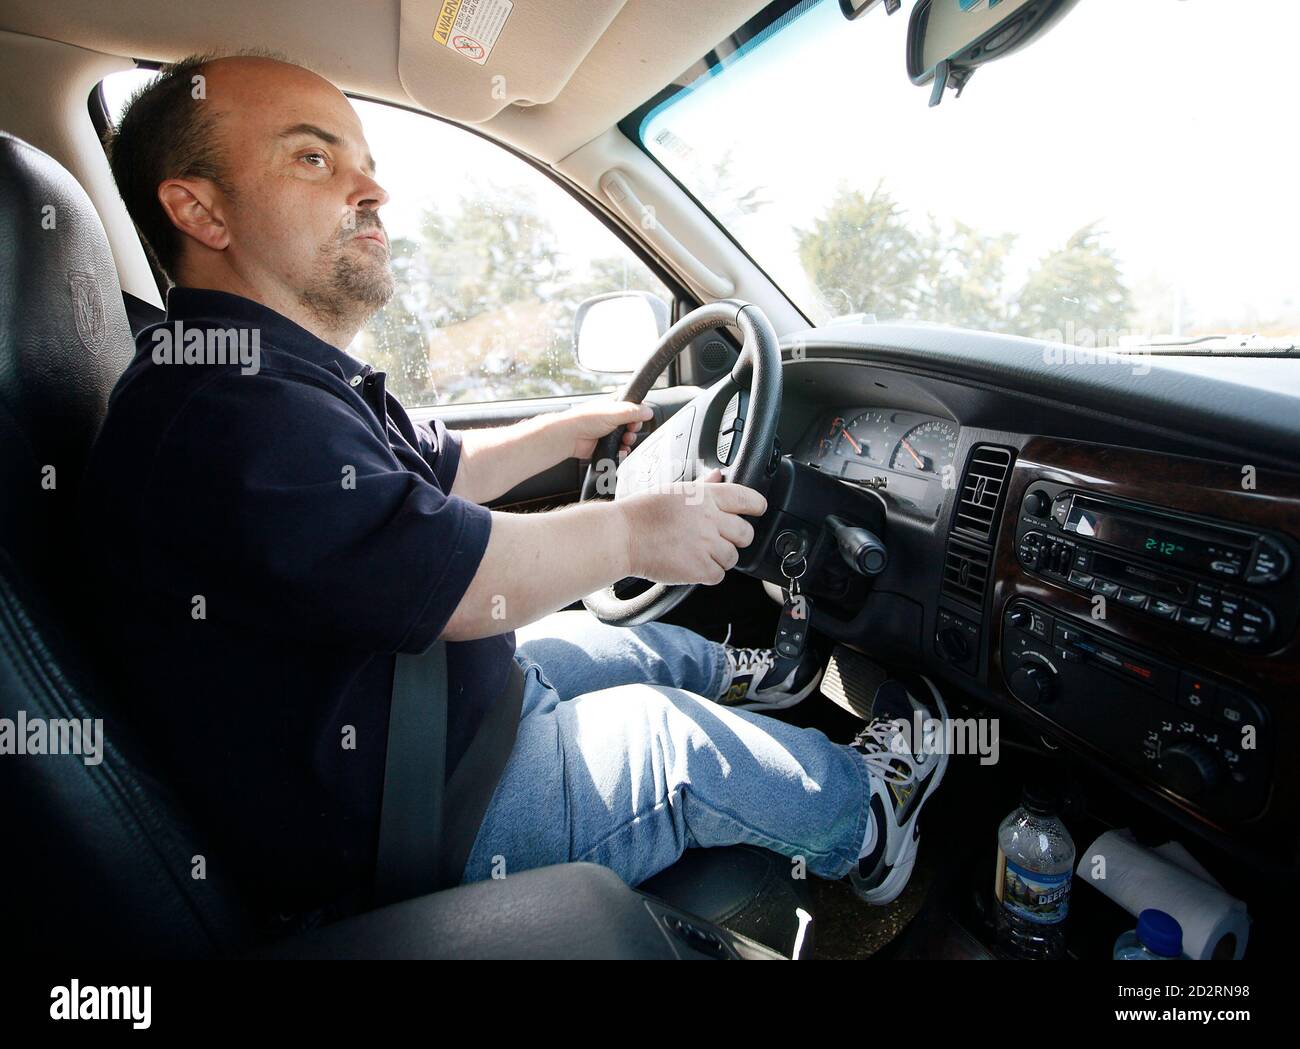 chris-kotzian-drives-his-car-on-a-shopping-trip-in-thornton-colorado-march-25-2010-chris-a-little-person-needs-extensions-on-the-gas-pedal-and-brake-as-he-is-about-4-feet-tall-chris-is-active-in-the-little-people-of-america-the-only-dwarfism-support-organization-that-includes-all-200-forms-of-dwarfism-to-match-feature-life-dwarfism-reutersrick-wilking-united-states-2D2RN98.jpg